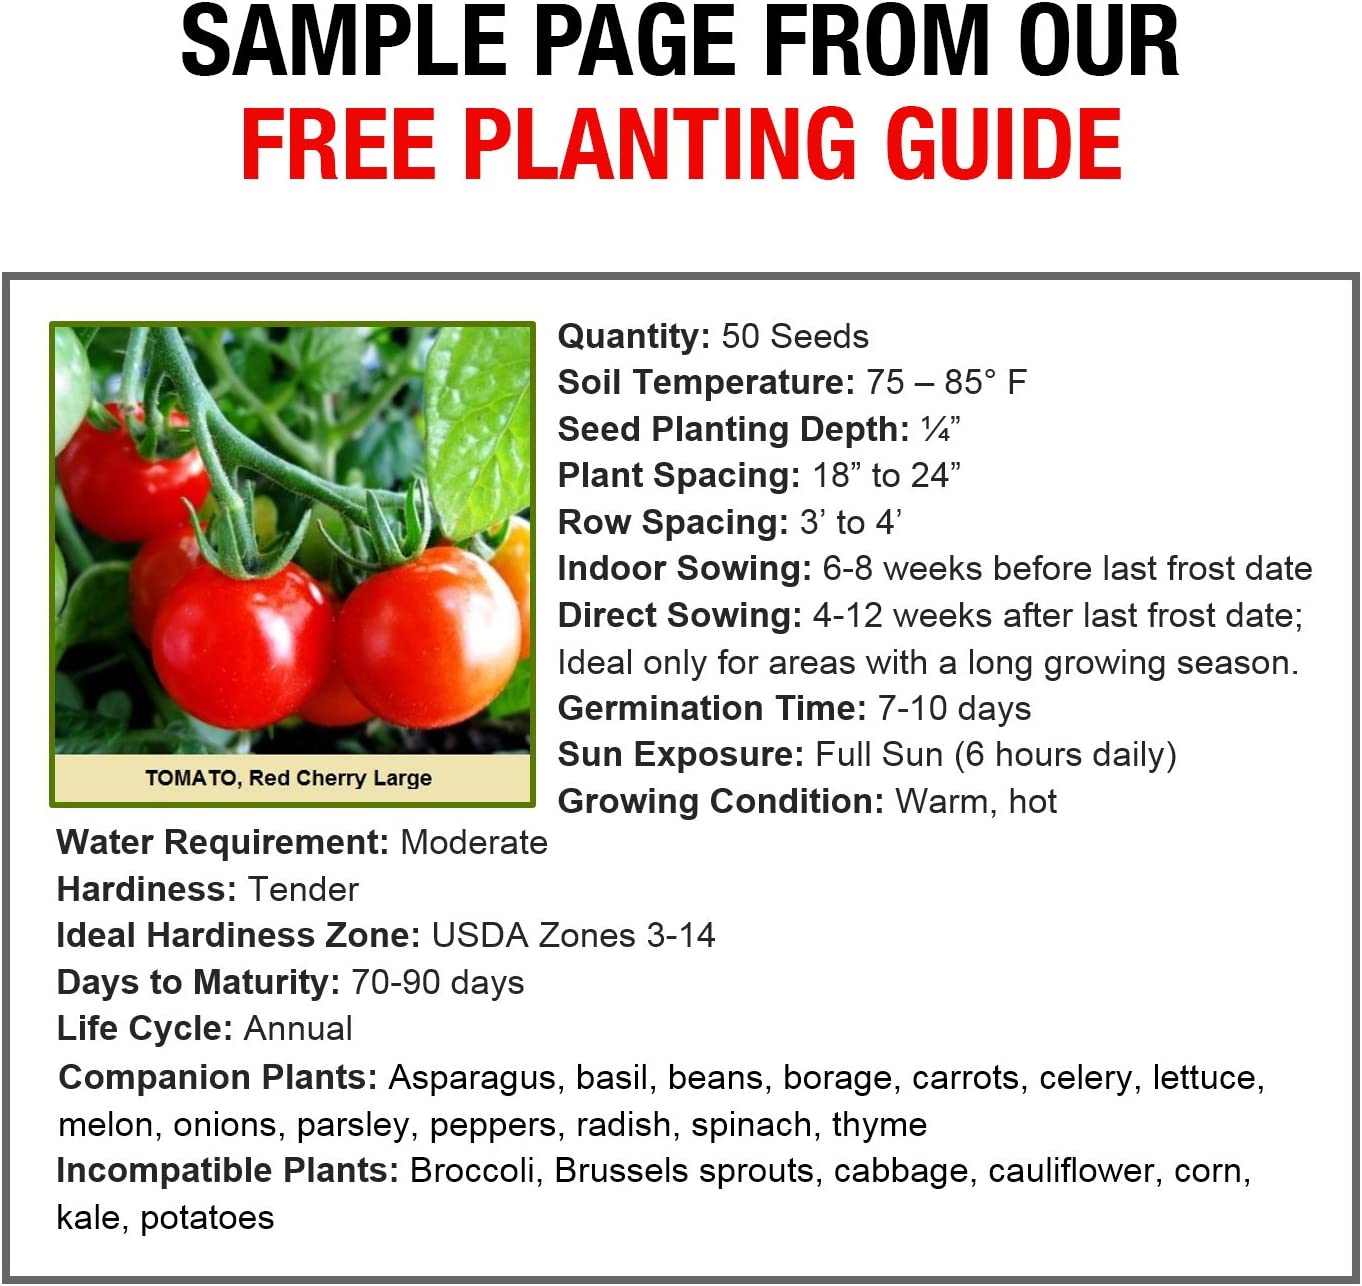 Sample page from our free planting guide